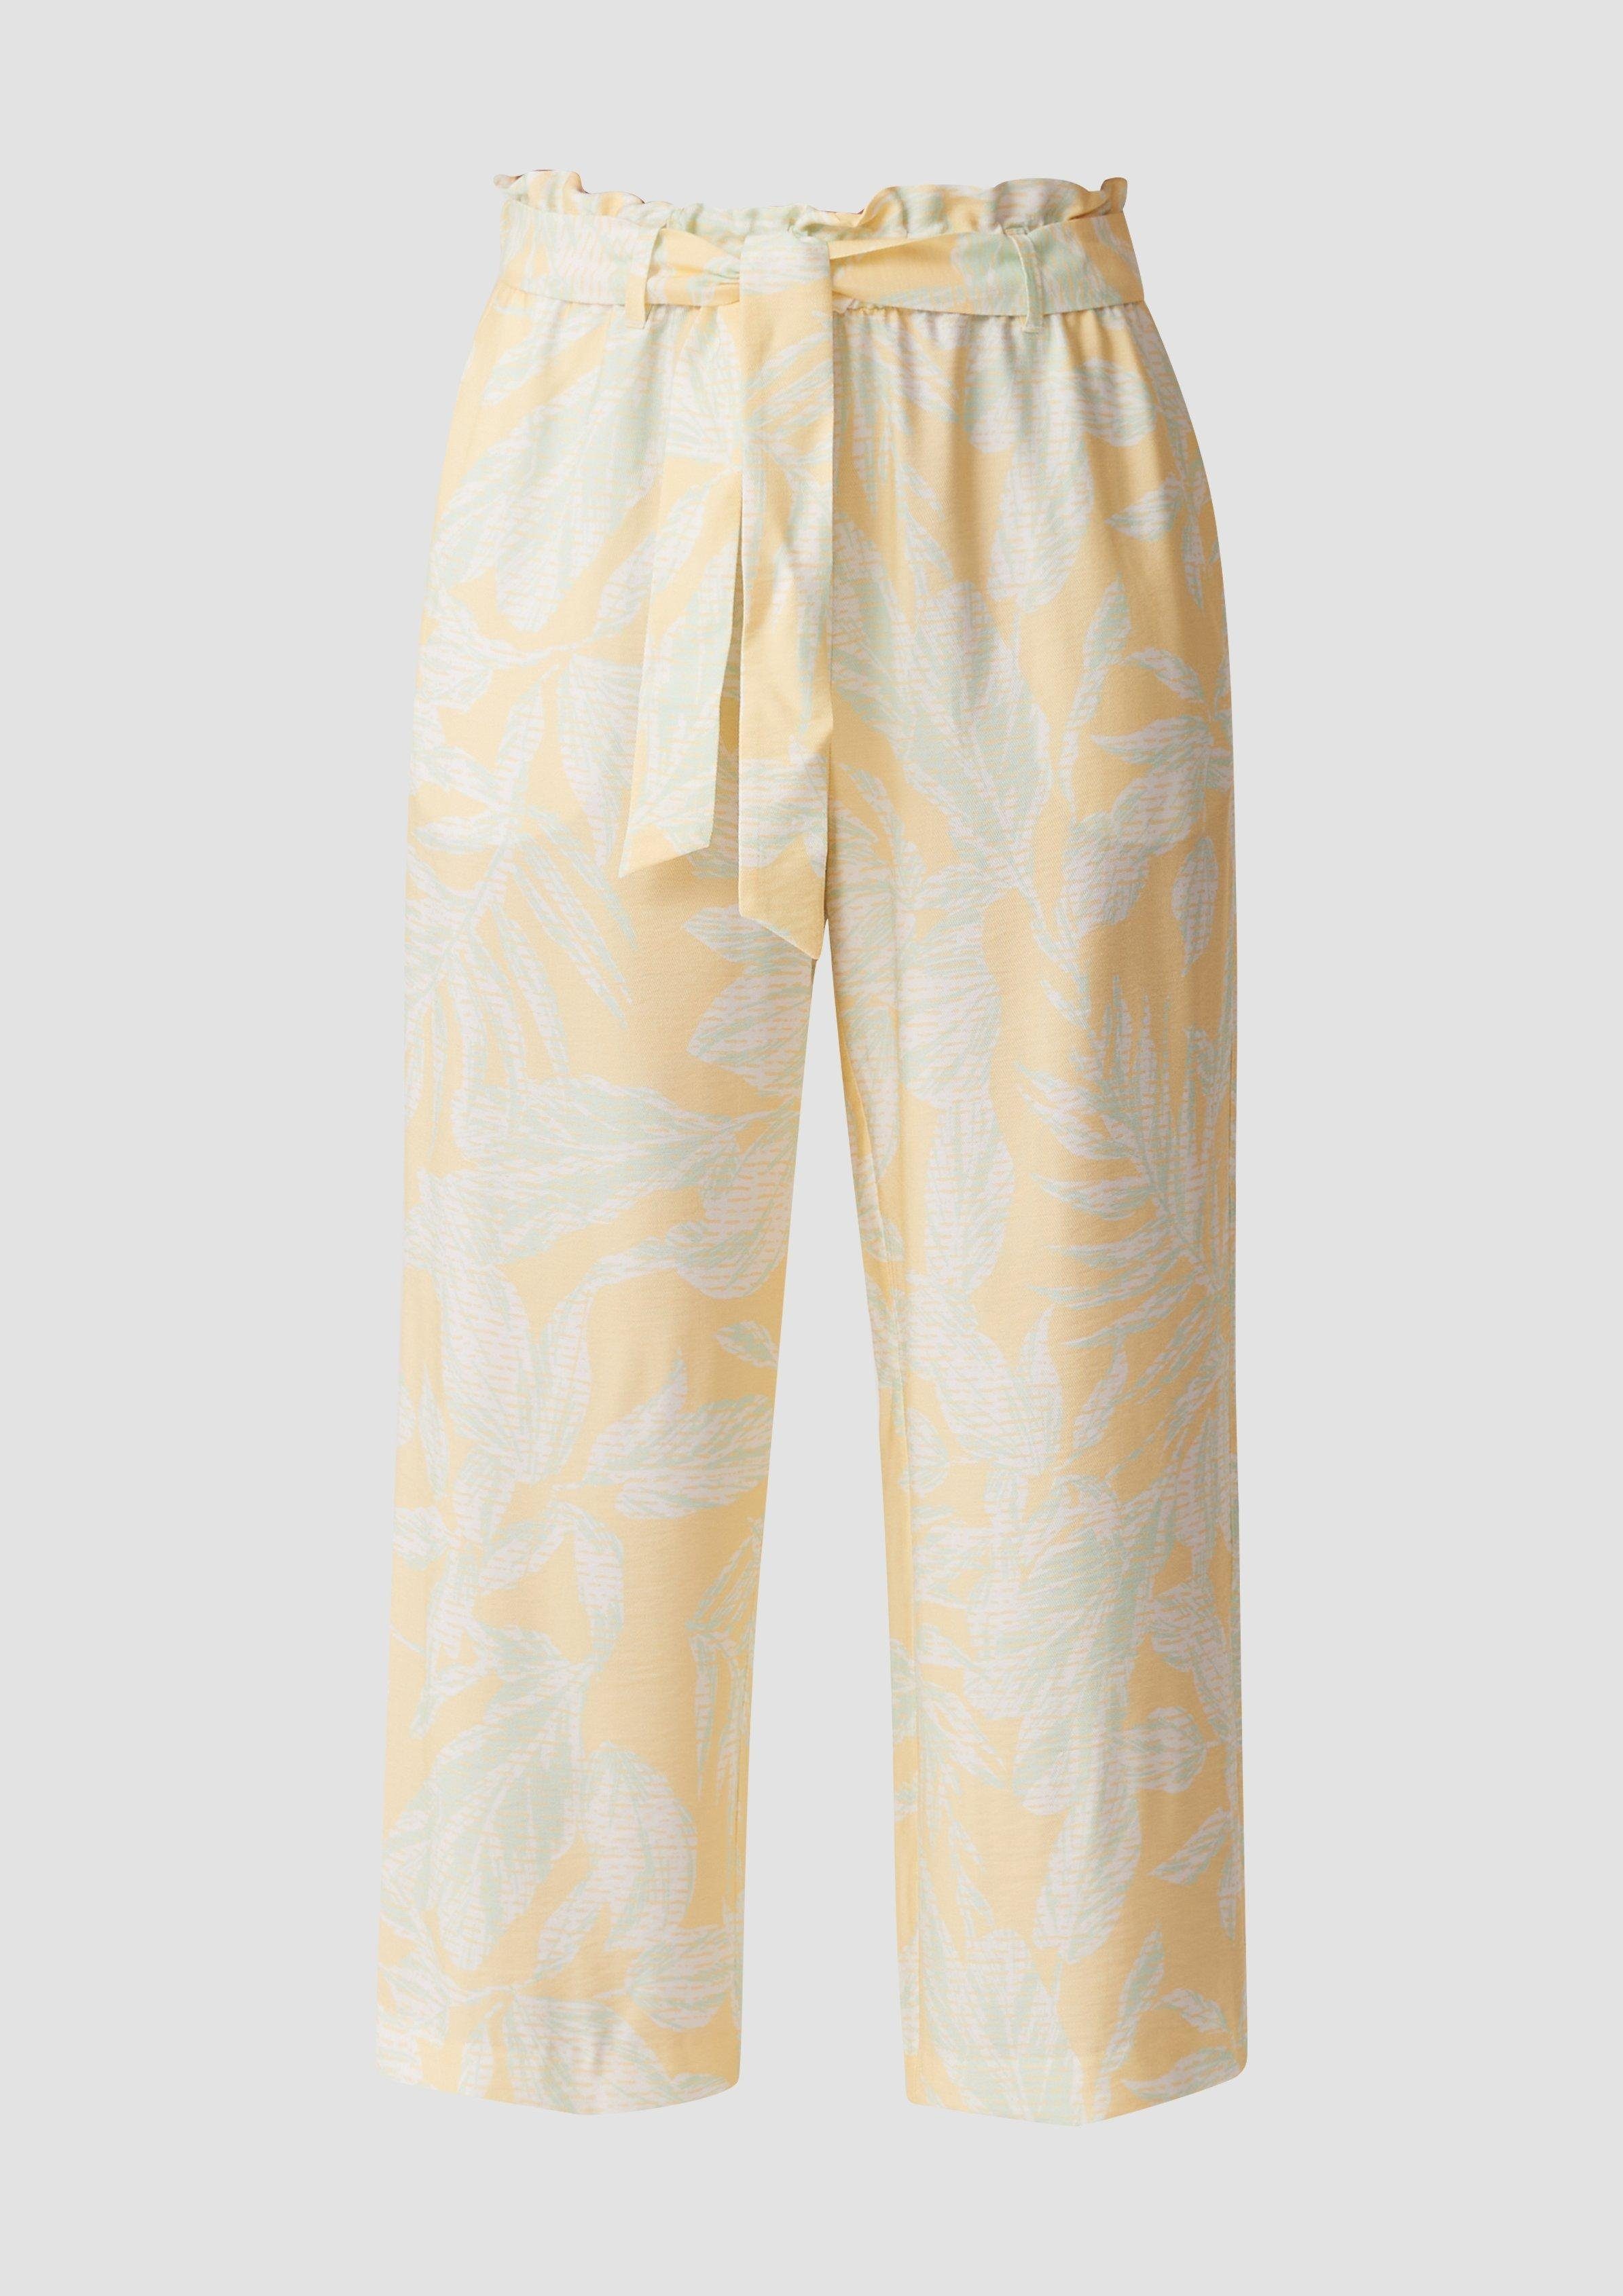 Comma Stoffhose Loose: Allover-Print Hose vanille mit